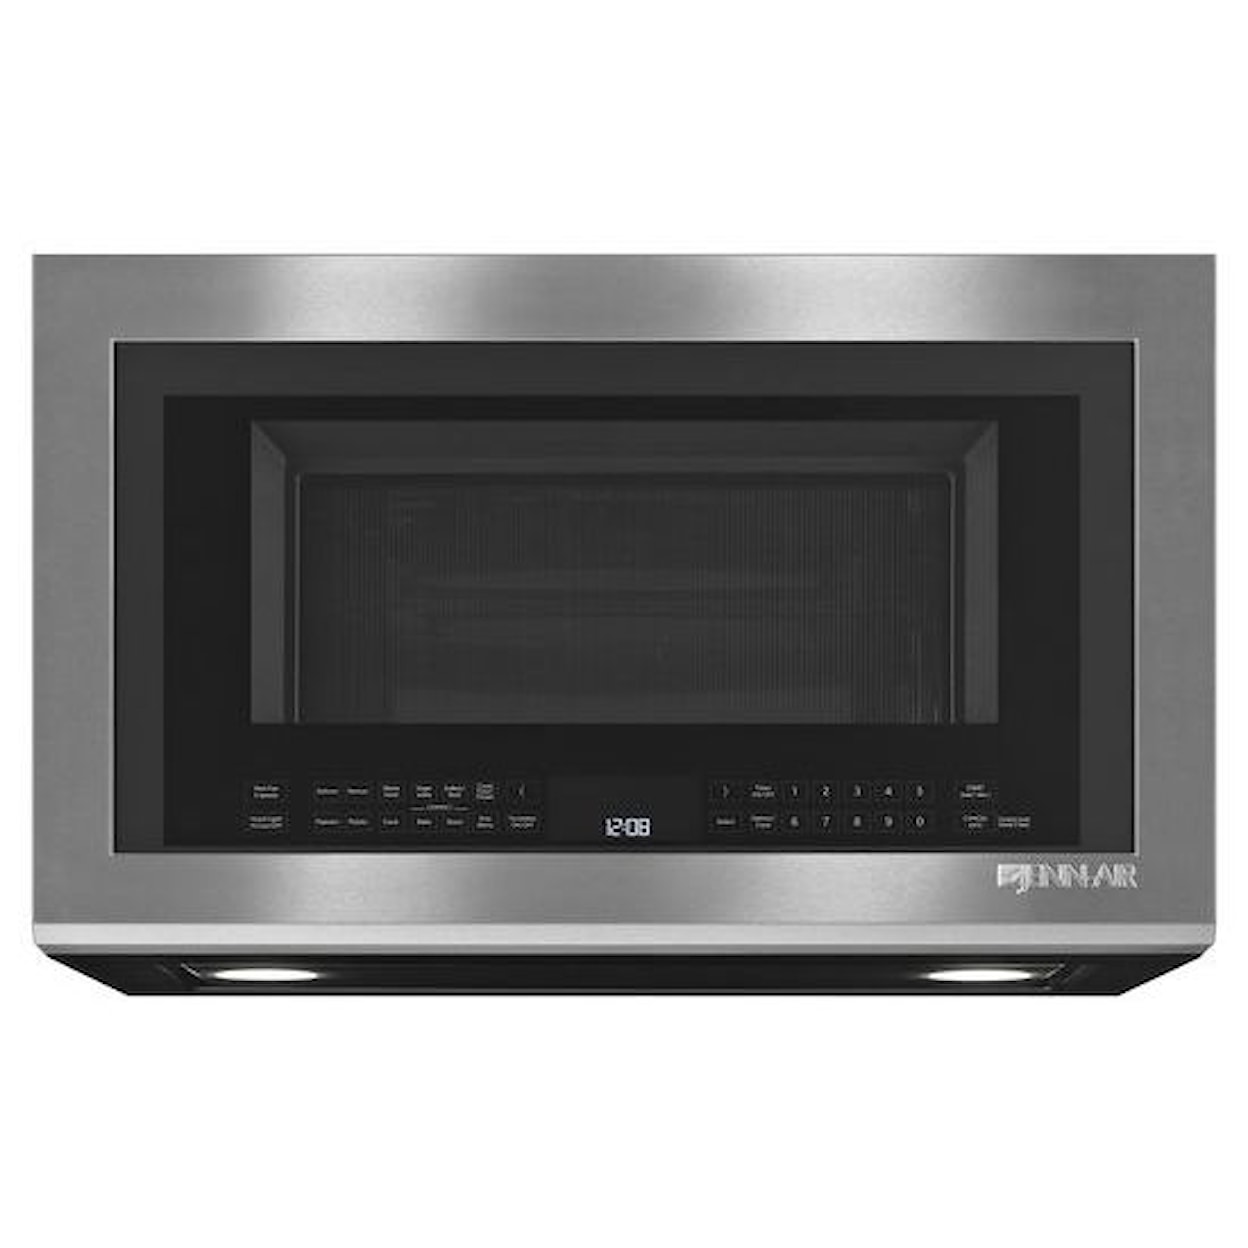 Jenn-Air Microwaves 30-Inch Over-the-Range Microwave Oven